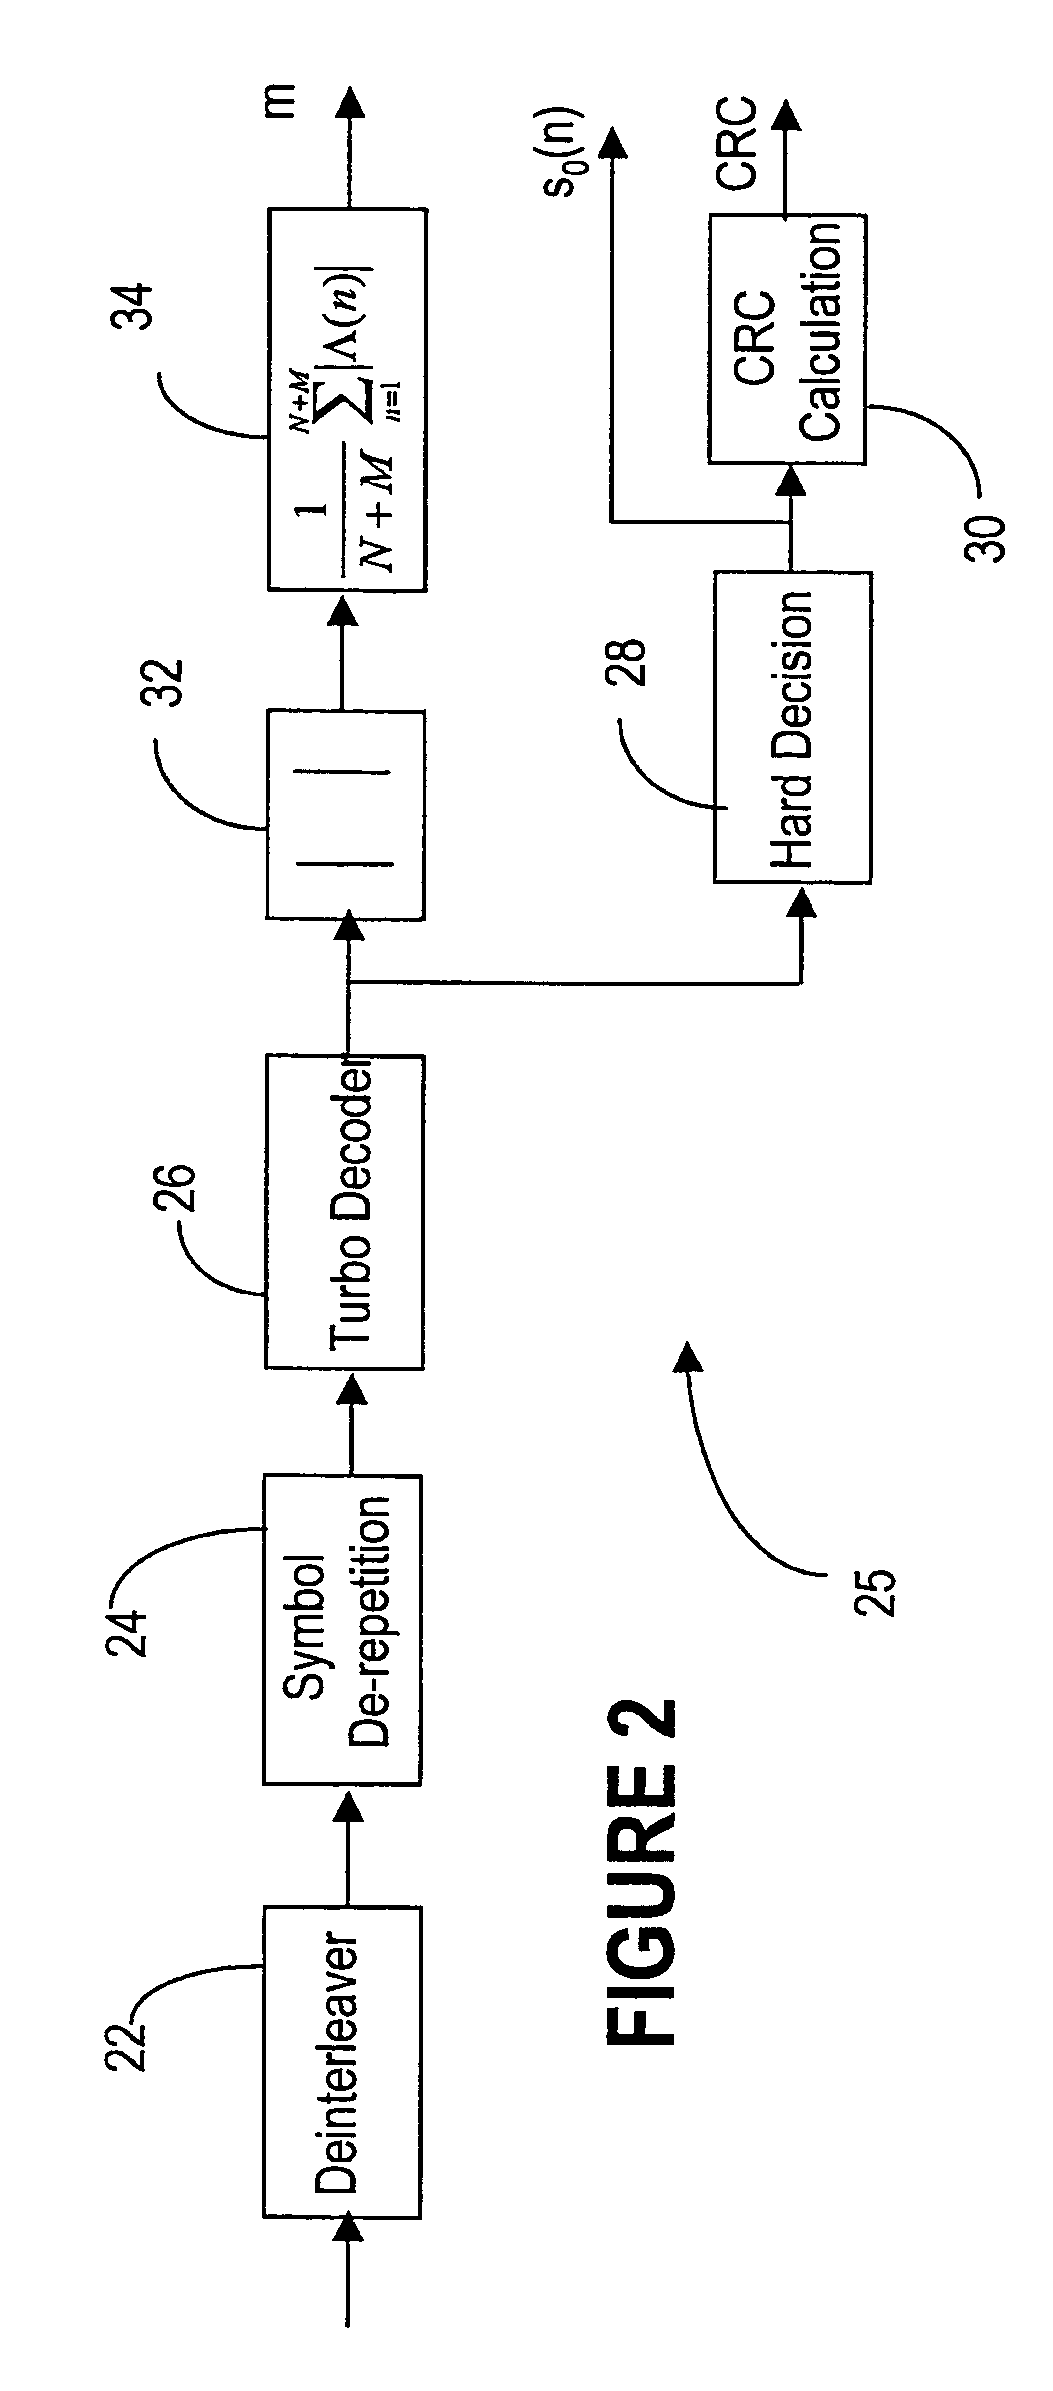 Method for determination of discontinuous transmission, frame erasure, and rate